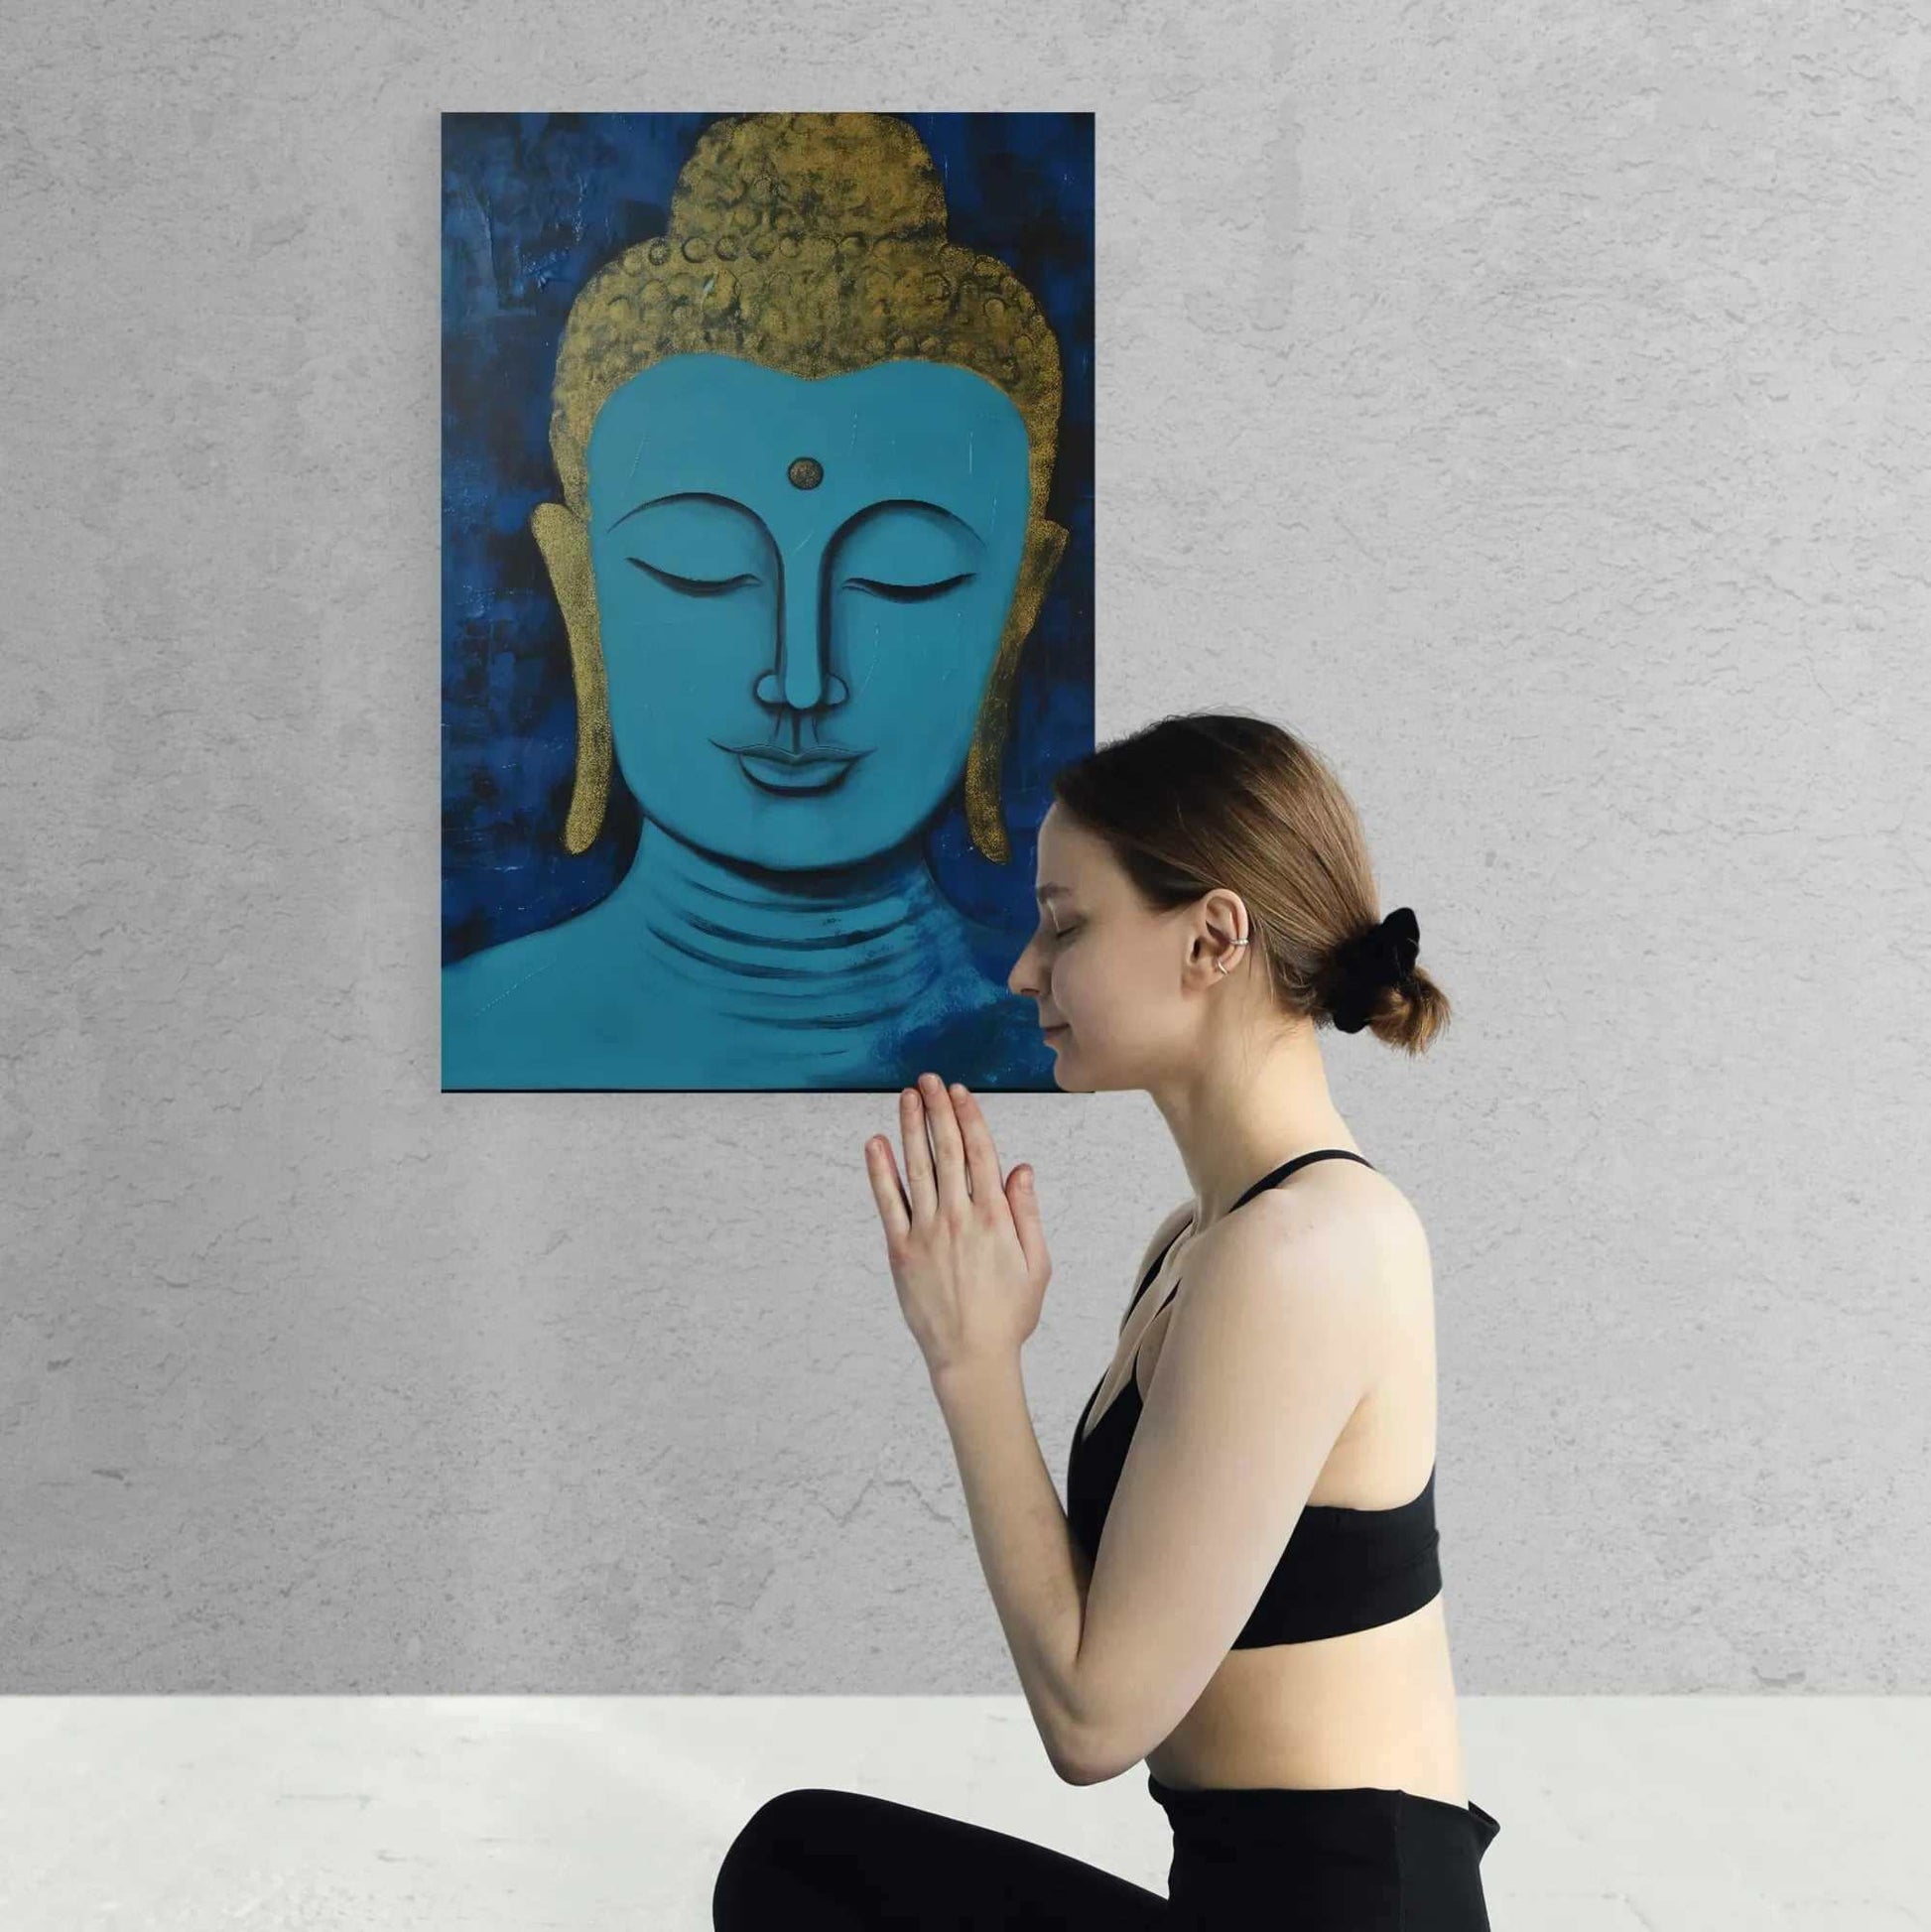 Woman in meditation pose in front of a Buddha painting, adding a peaceful aura to a minimalist space with textured walls.